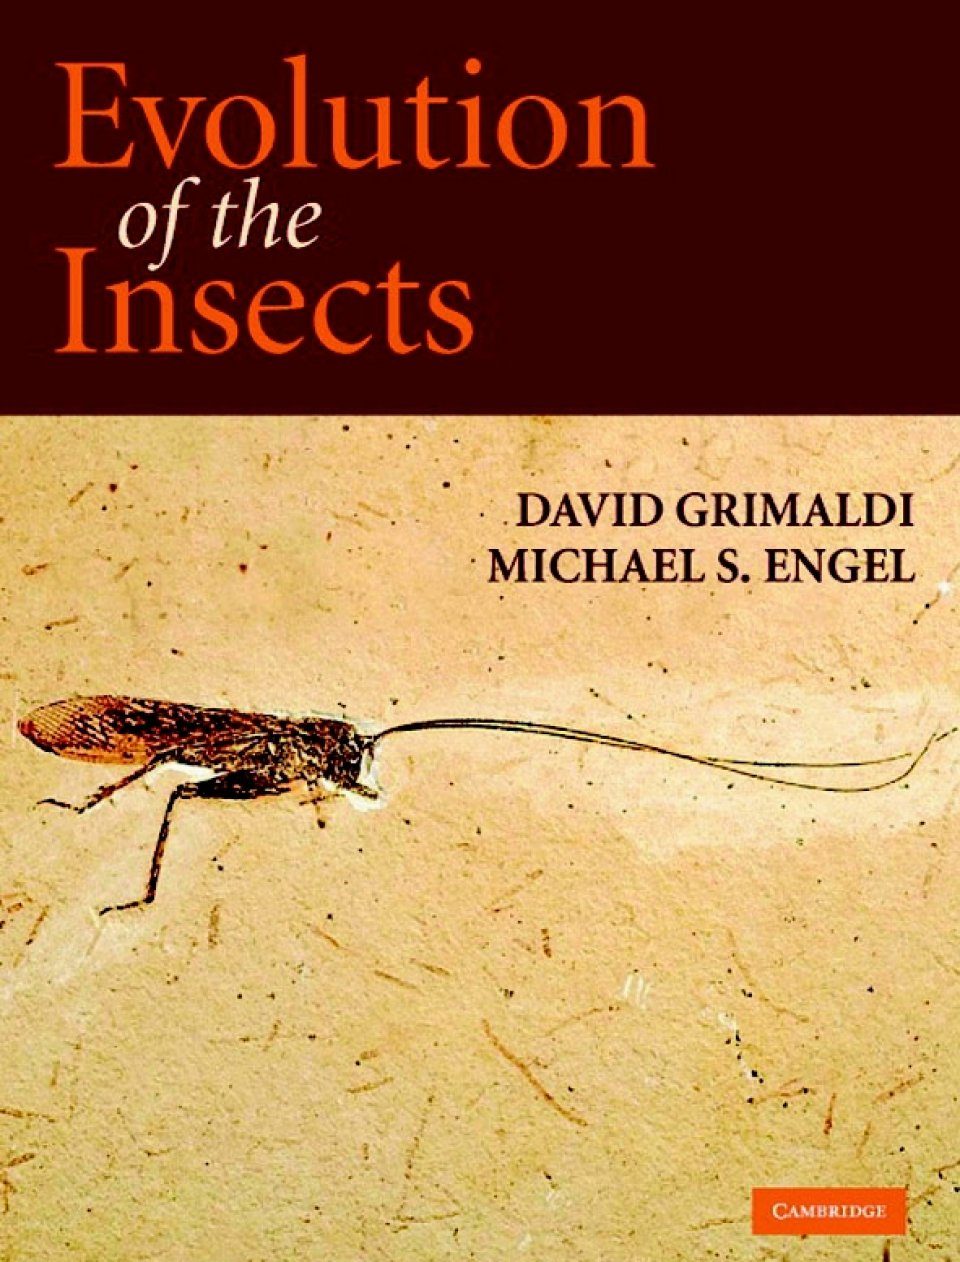 Evolution of the Insects NHBS Academic and Professional Books pic